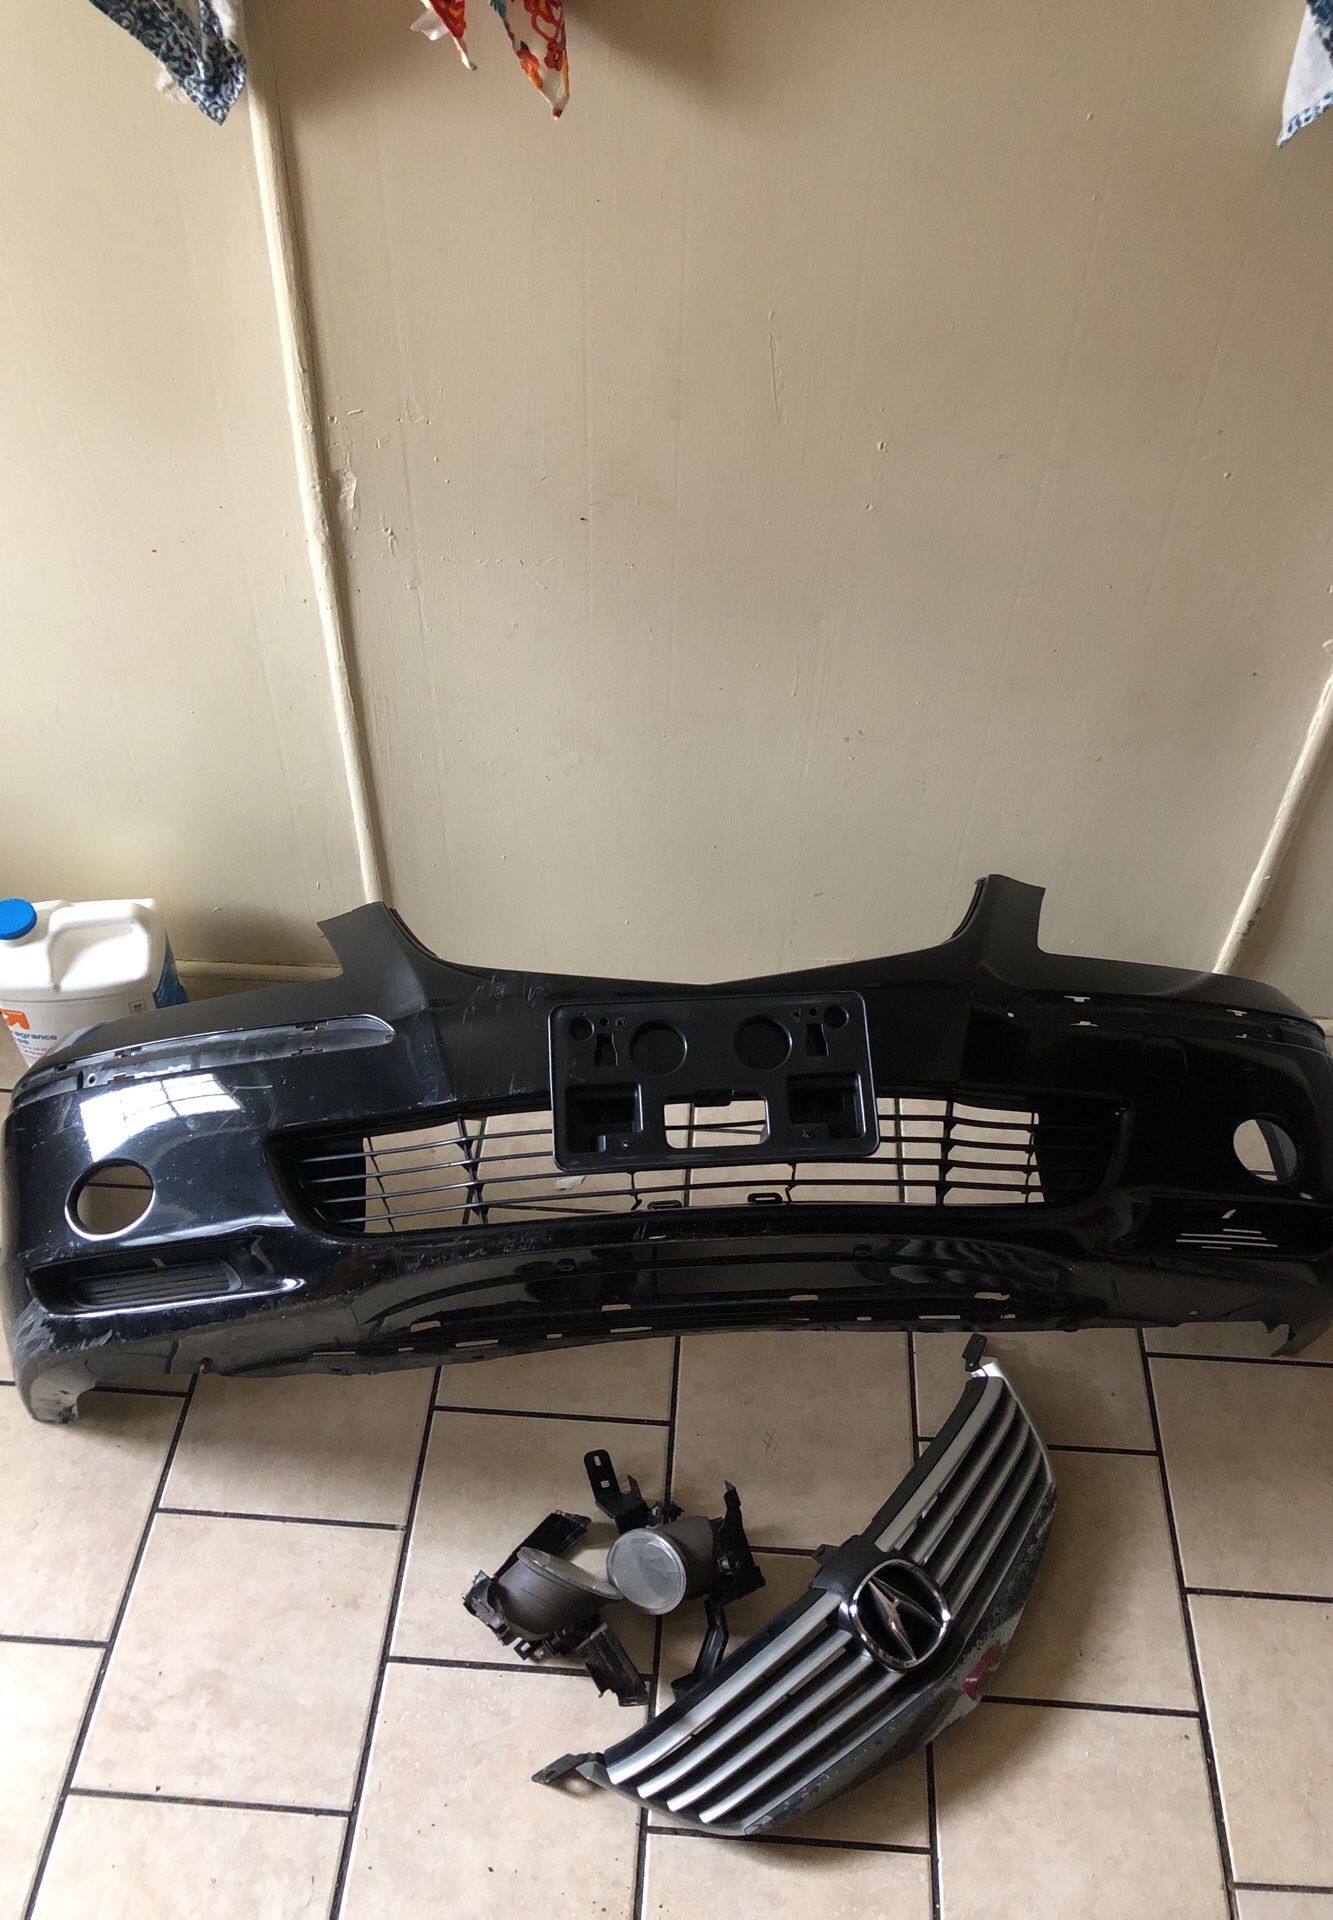 2006 Acura rl bumper wit fog lights and grill $200